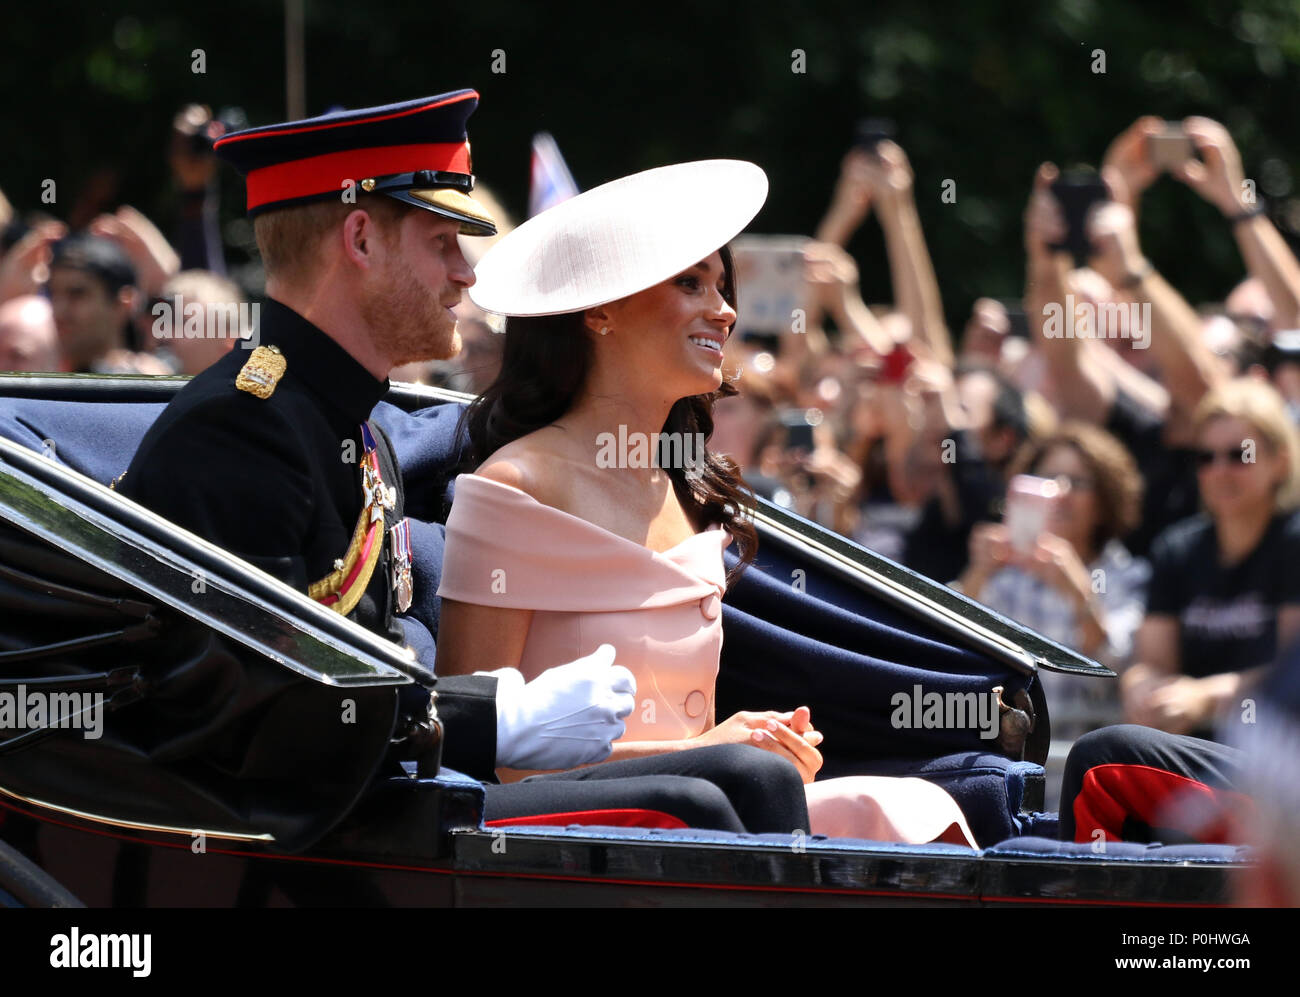 The British Royal family at the Trooping of the Colour 2018. Trooping the Colour marks the Queens official birthday. Trooping the Colour, London, June 09, 2018 Stock Photo